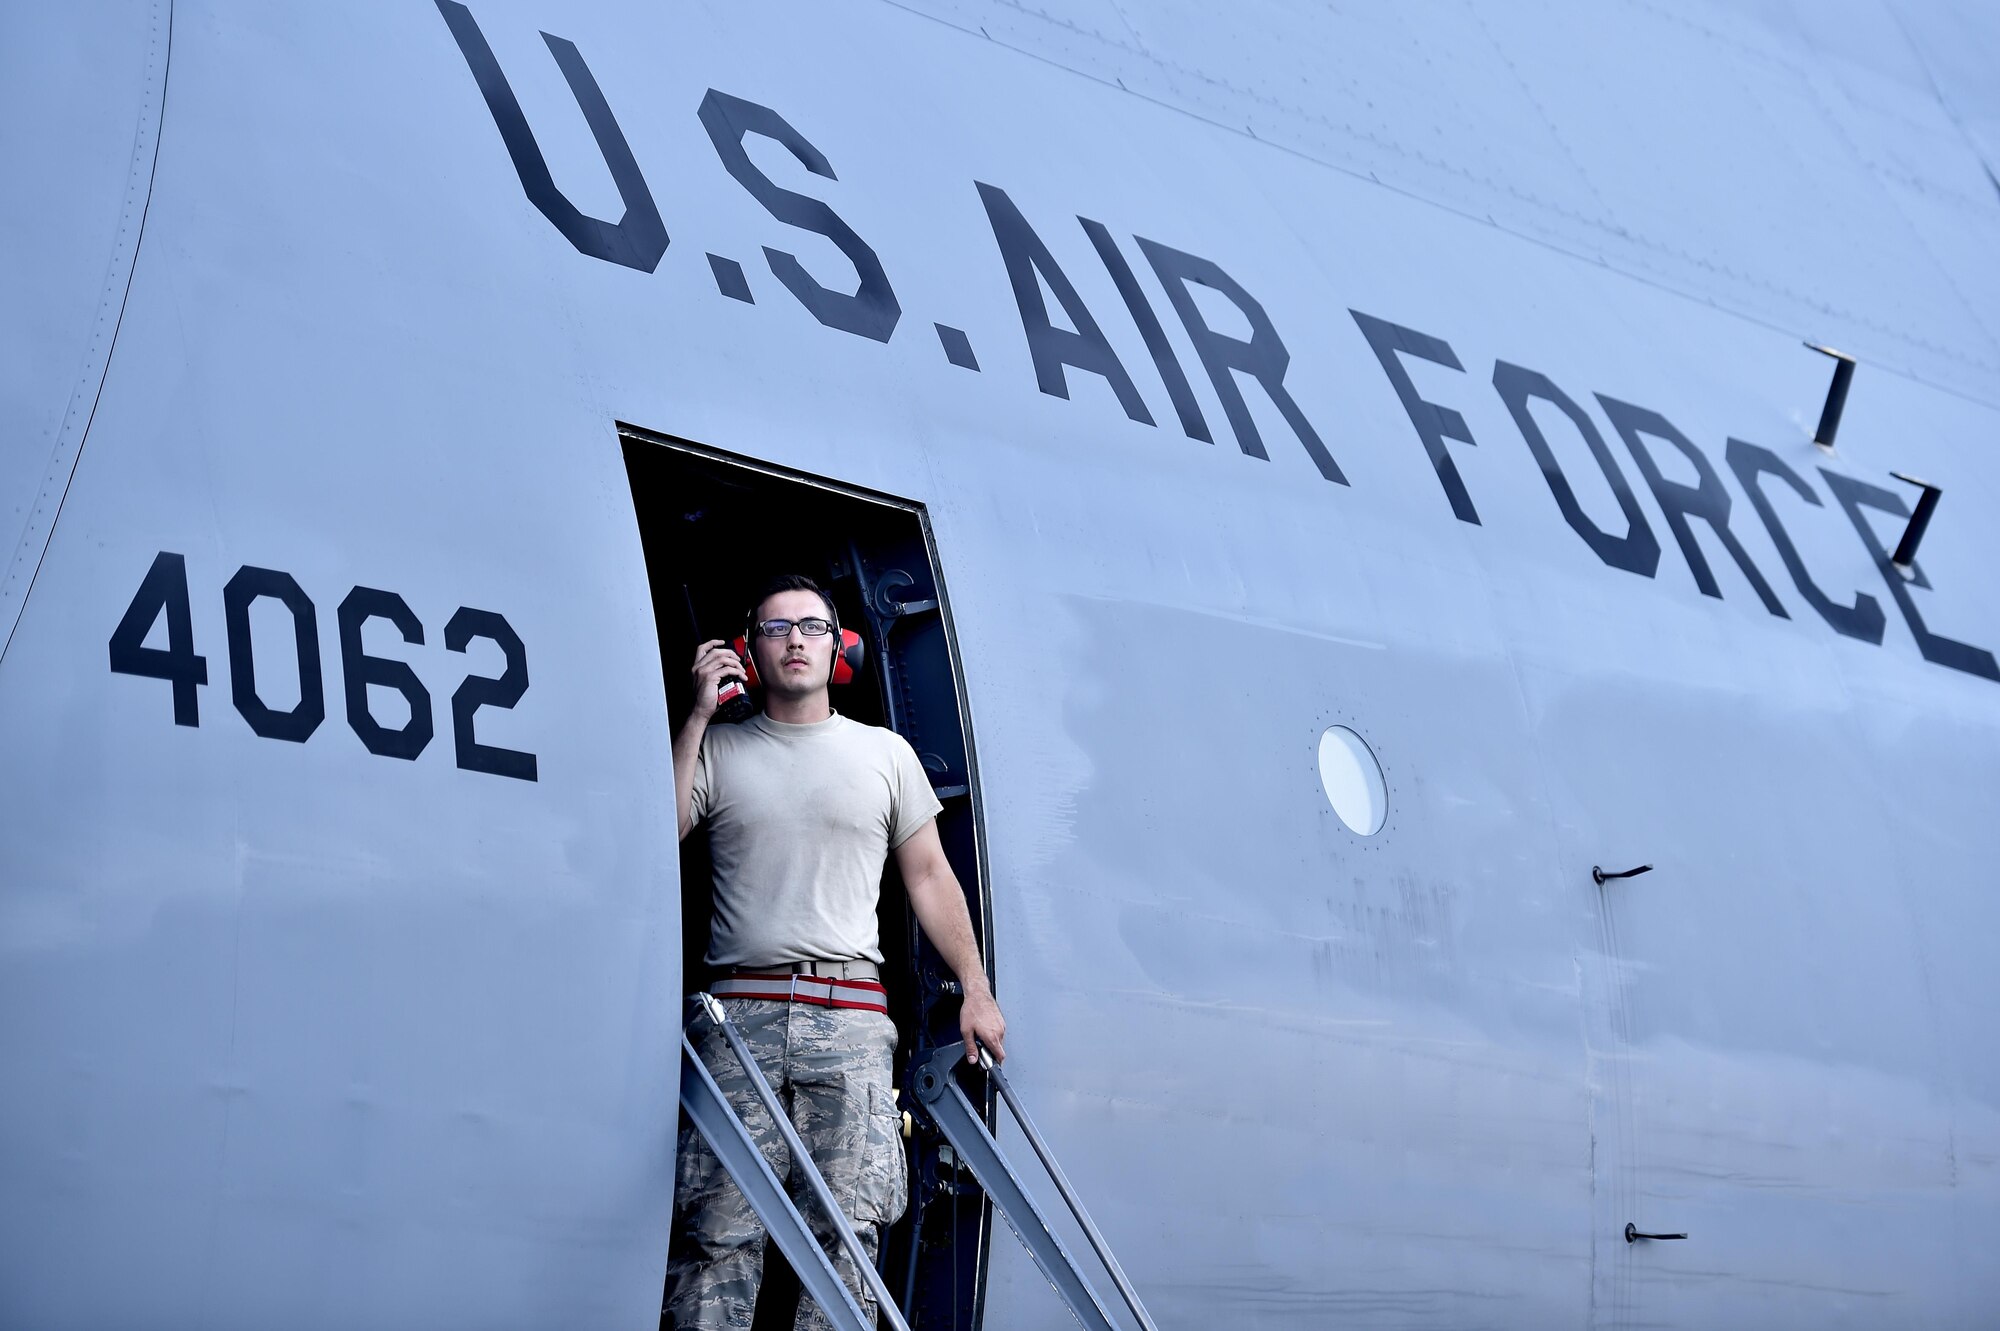 Staff Sgt. Thomas Ferris, 42nd Aerial Port Squadron cargo specialist, communicates with his team as they load cargo onto a C-5M Super Galaxy at Homestead Air Reserve Base, Fla, Sep. 16, 2017.  The 439th Airlift Wing from Westover Air Reserve Base, Mass., deployed approximately 50 Airmen in support of Hurricane Irma relief efforts. (U.S. Air Force photo by Tech. Sgt. Liliana Moreno/Released)